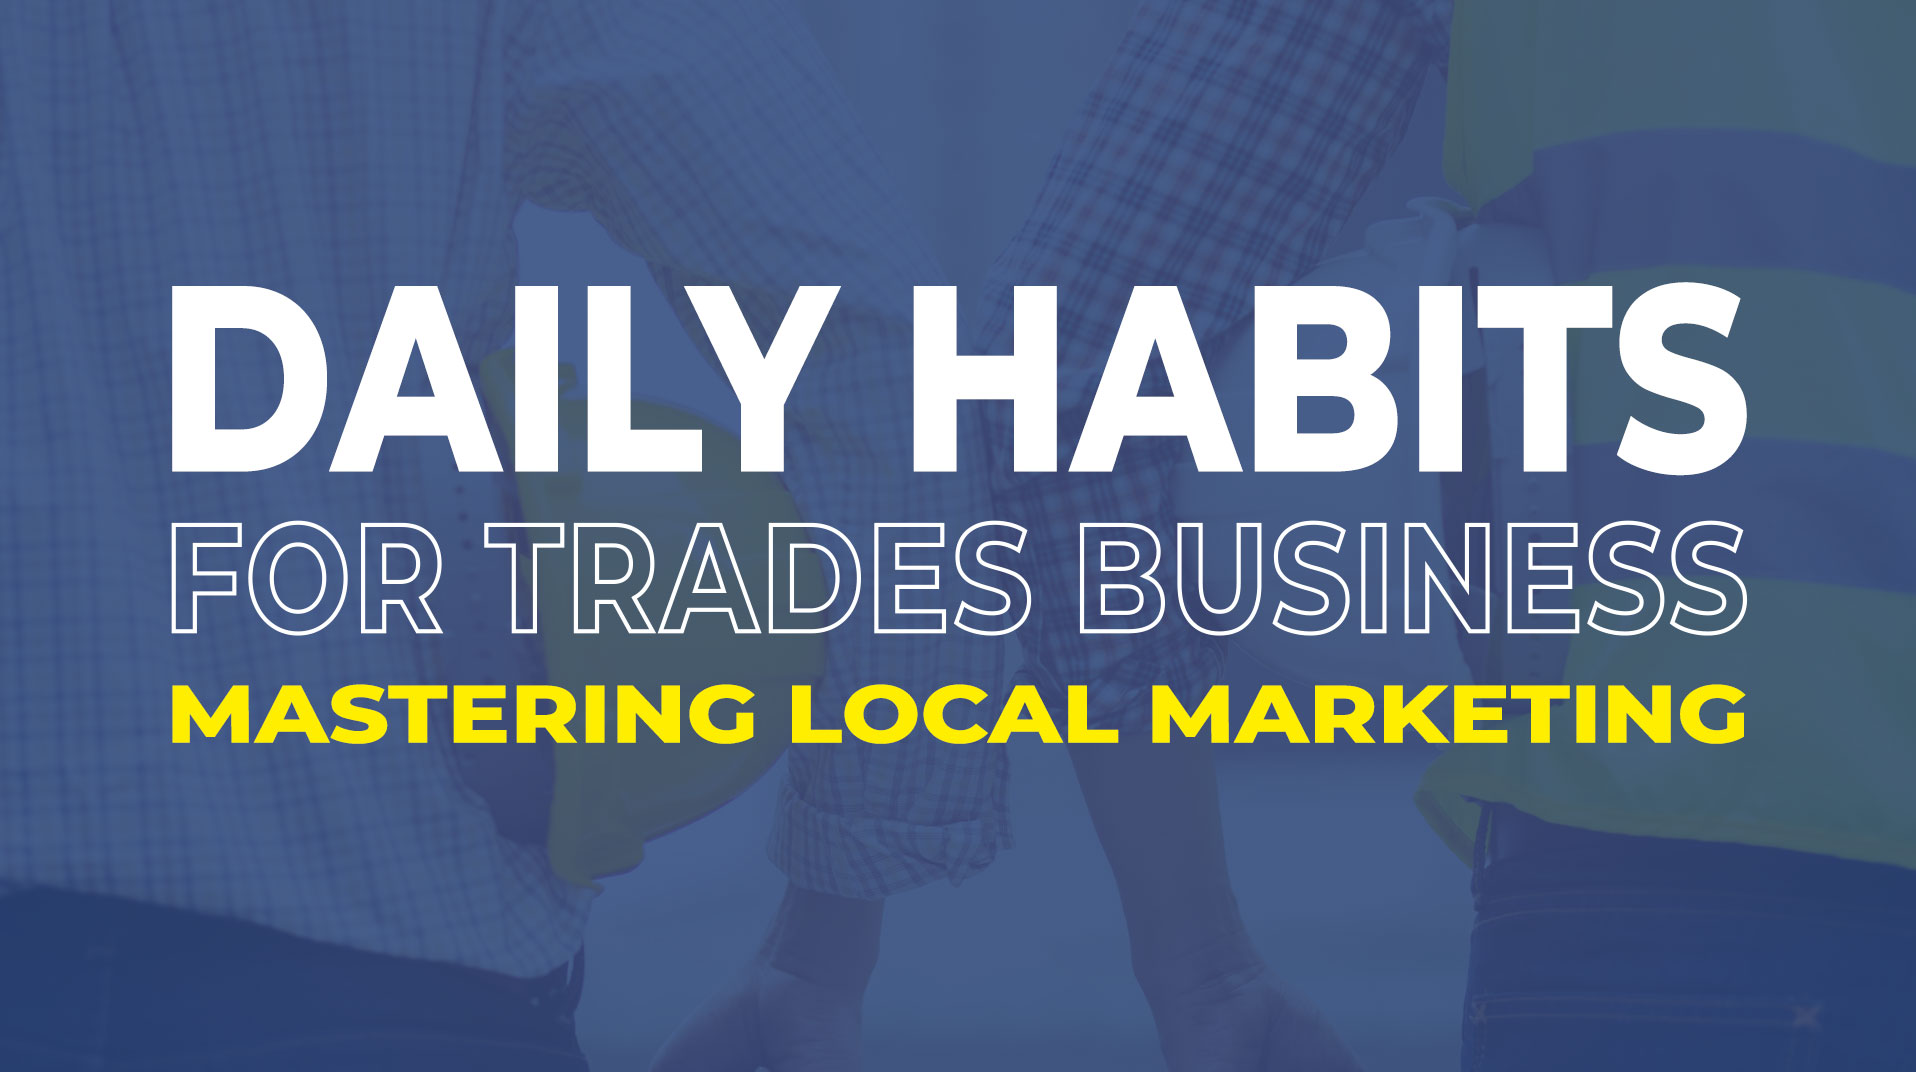 Mastering Local Marketing: 4 Powerful Daily Habits for Trades Businesses